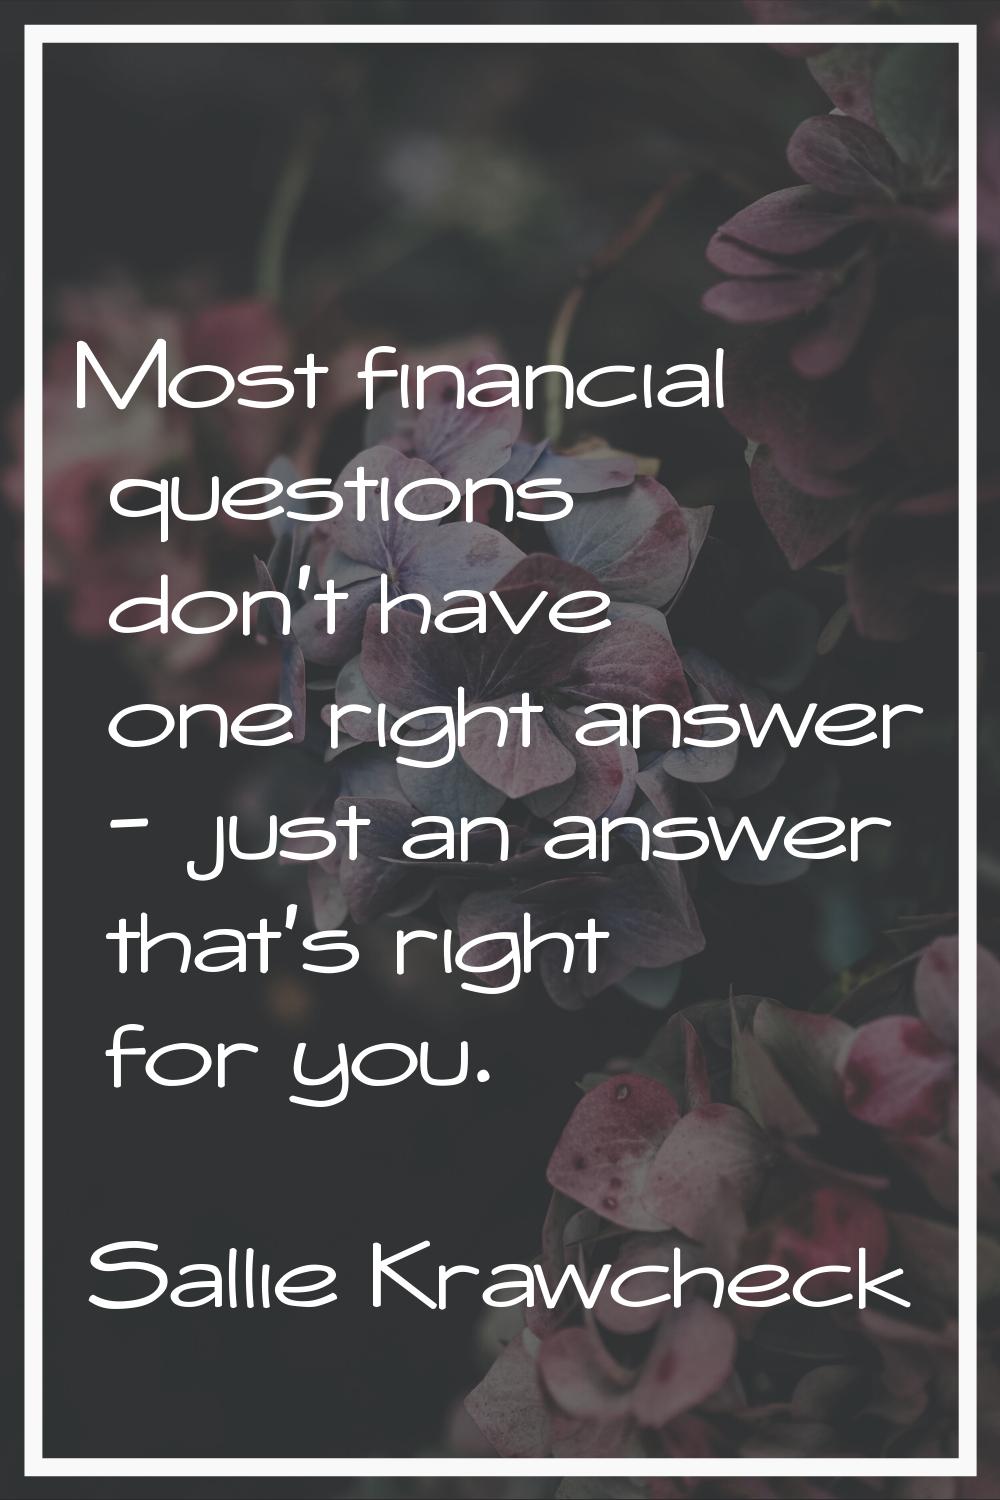 Most financial questions don't have one right answer - just an answer that's right for you.